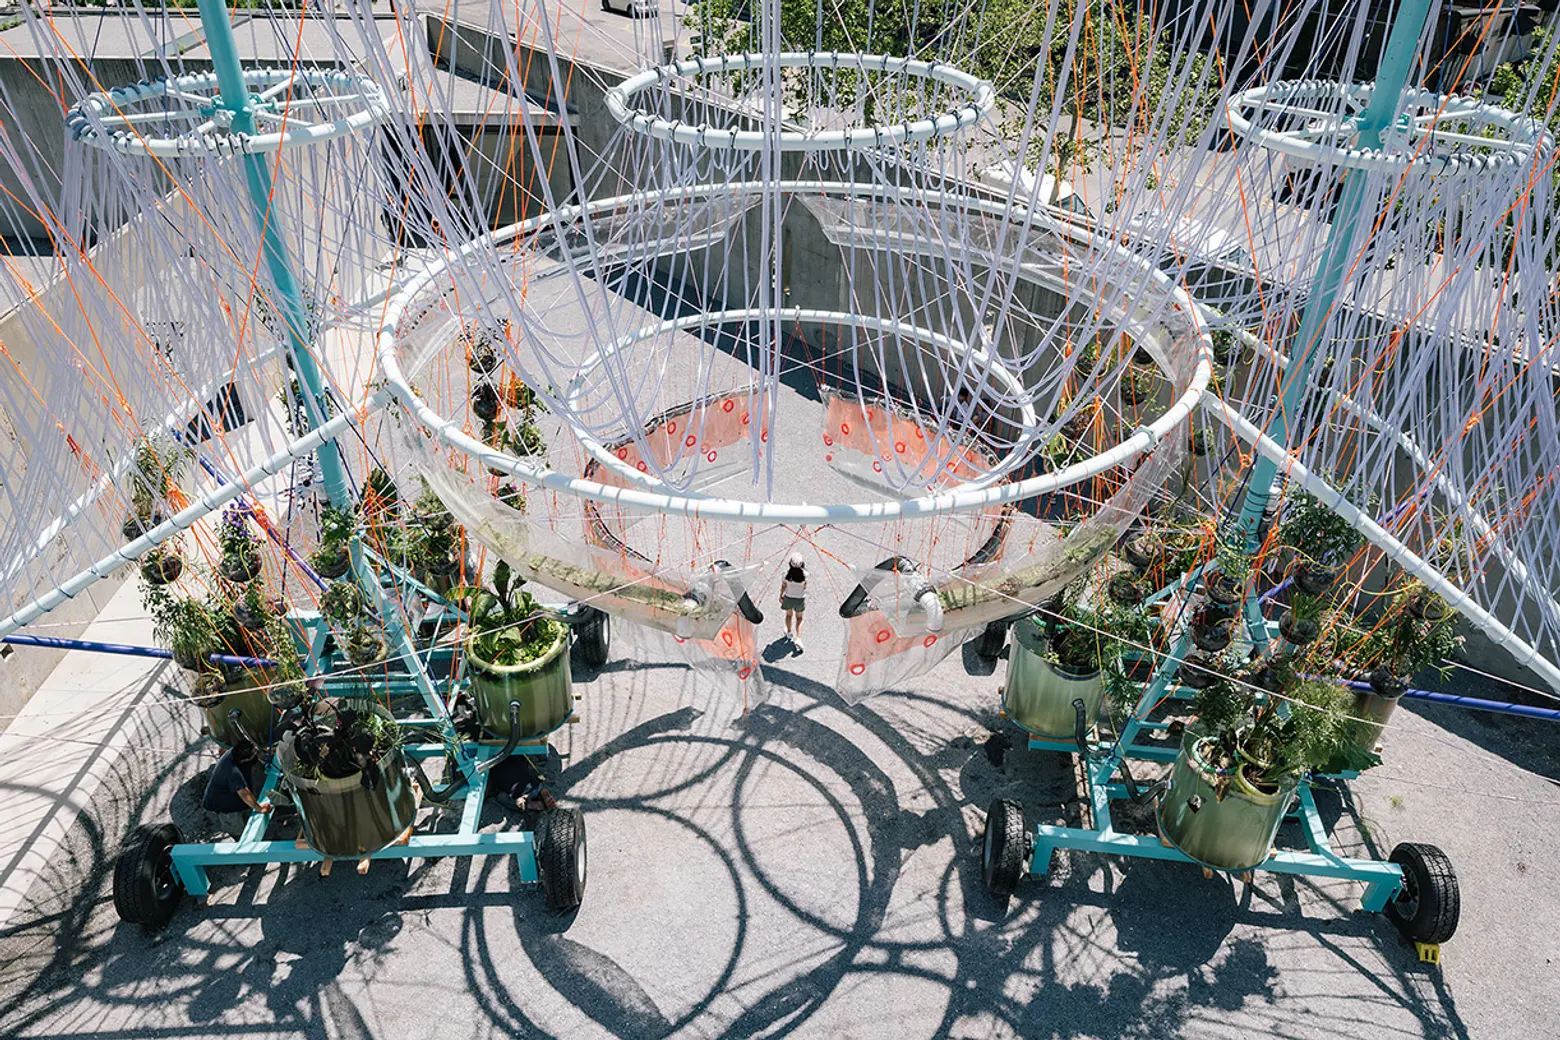 Office for Political Innovation, MoMA PS1, Andrés Jaque, MoMA Young Architects Program